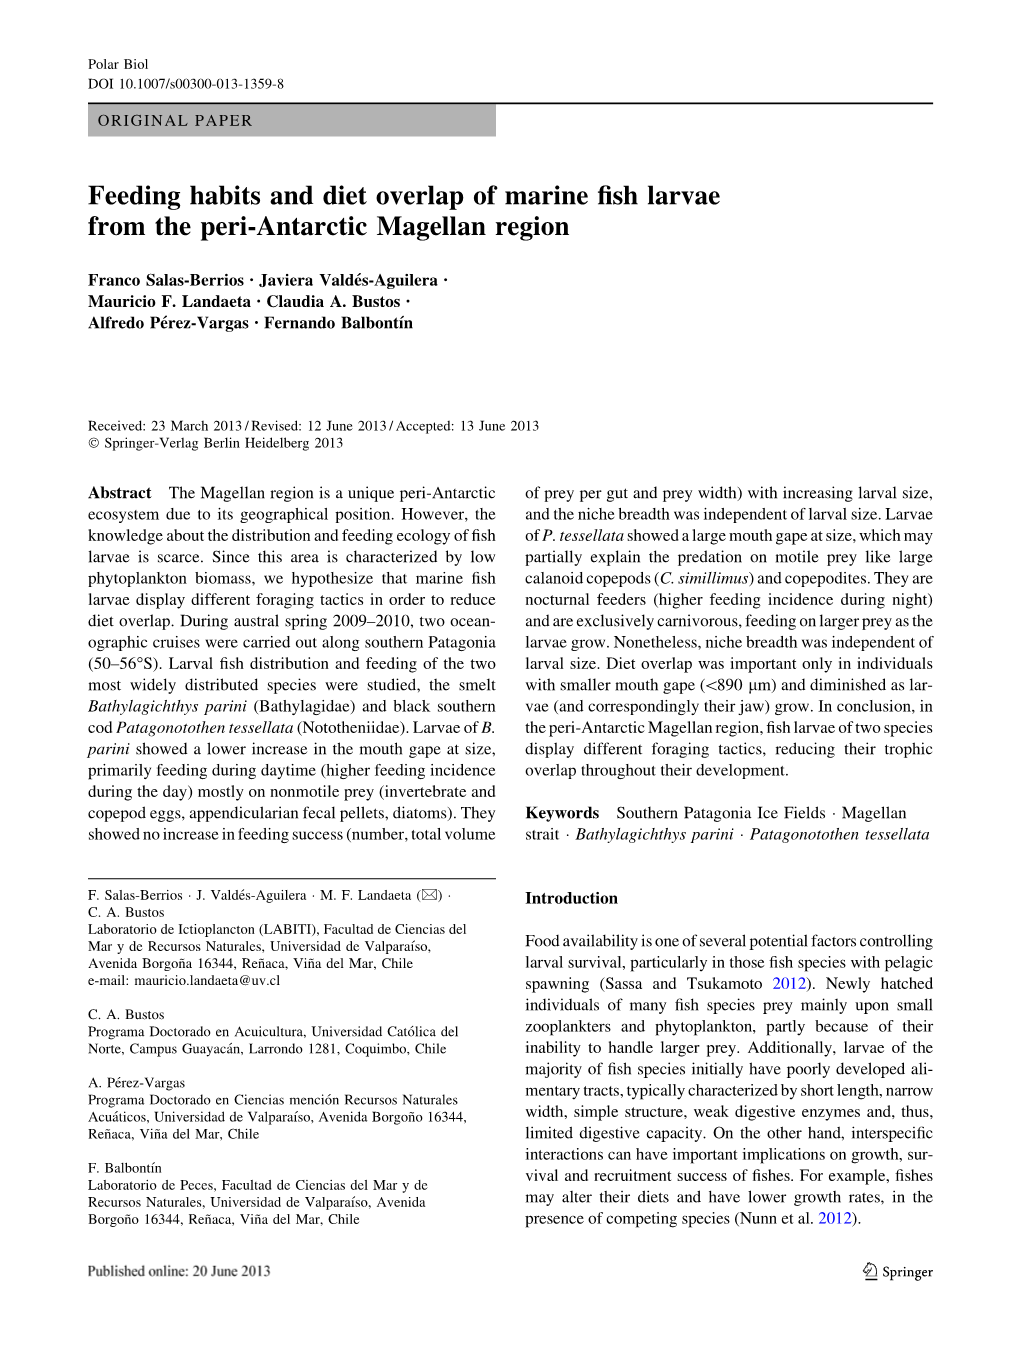 Feeding Habits and Diet Overlap of Marine Fish Larvae from the Peri